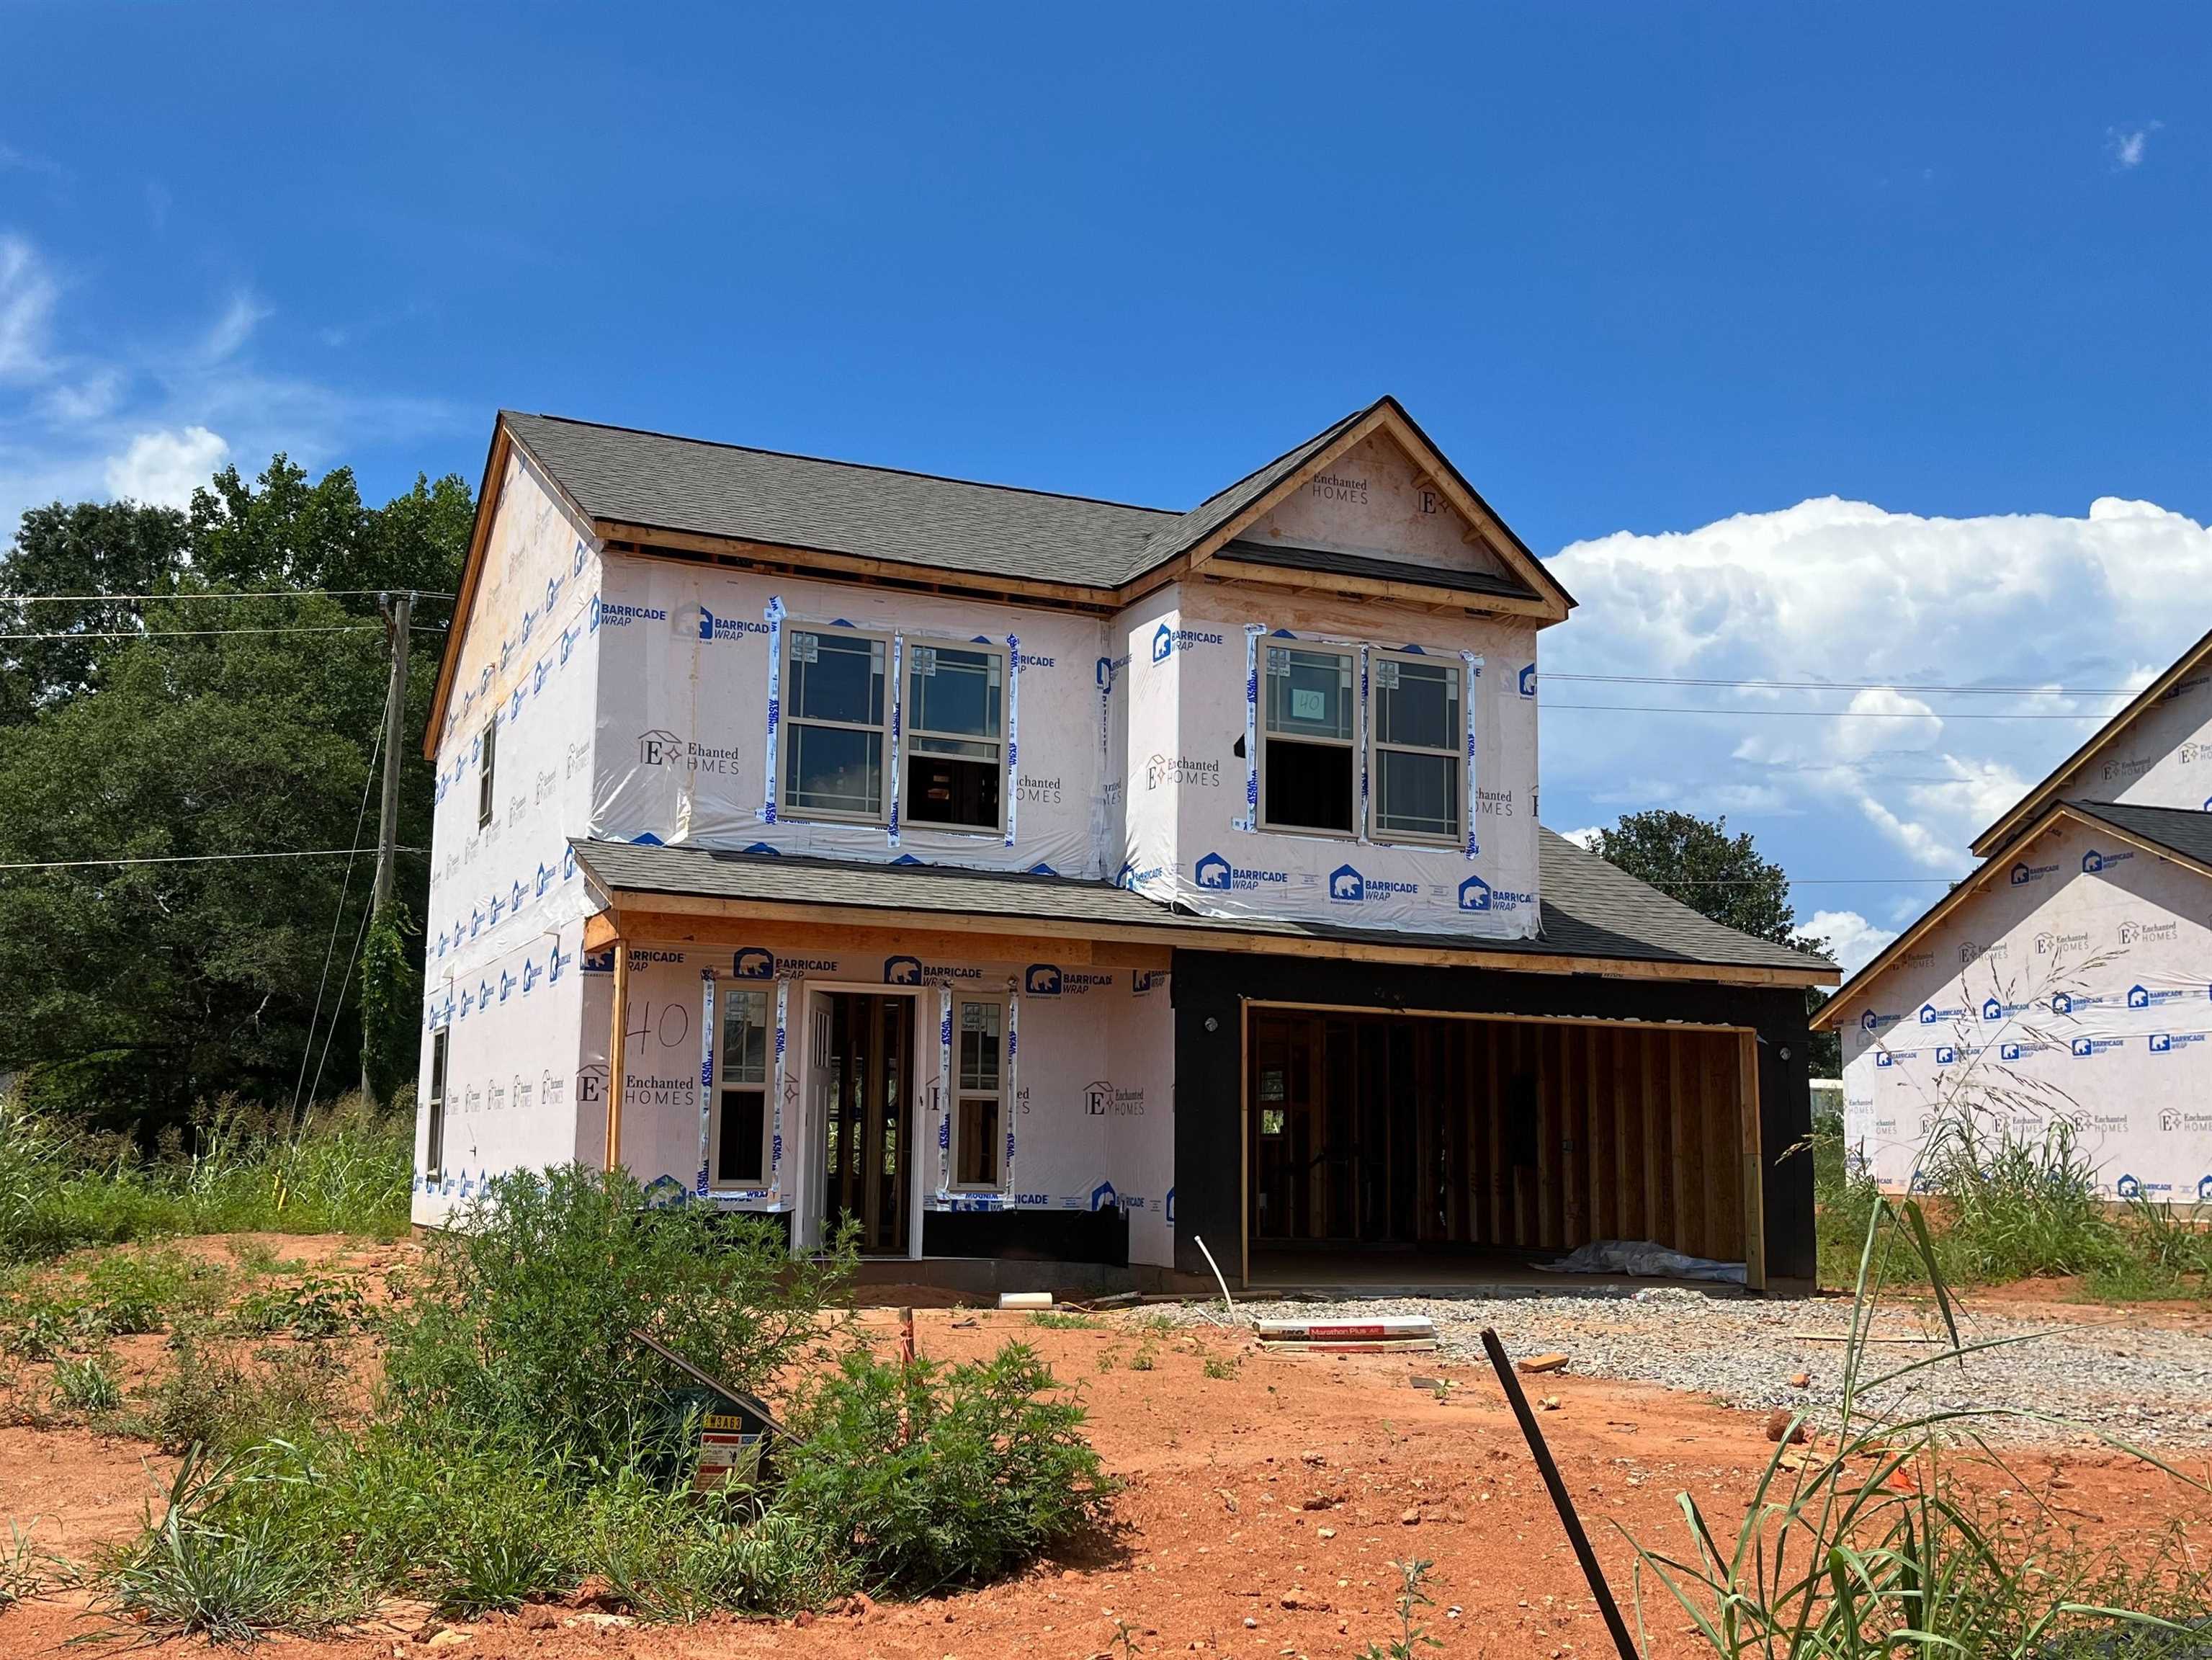 This is the REYNOLDS floorplan. Construction beginning soon on this 2 story home featuring 3 bedrooms, 2 1/2 bathrooms, vinyl flooring in common areas, 1/2 stone fireplace, and 12x12 back patio. Located in the NEW Elliott park community in Lyman just minutes from Spartanburg and Greenville. Call today for more info!